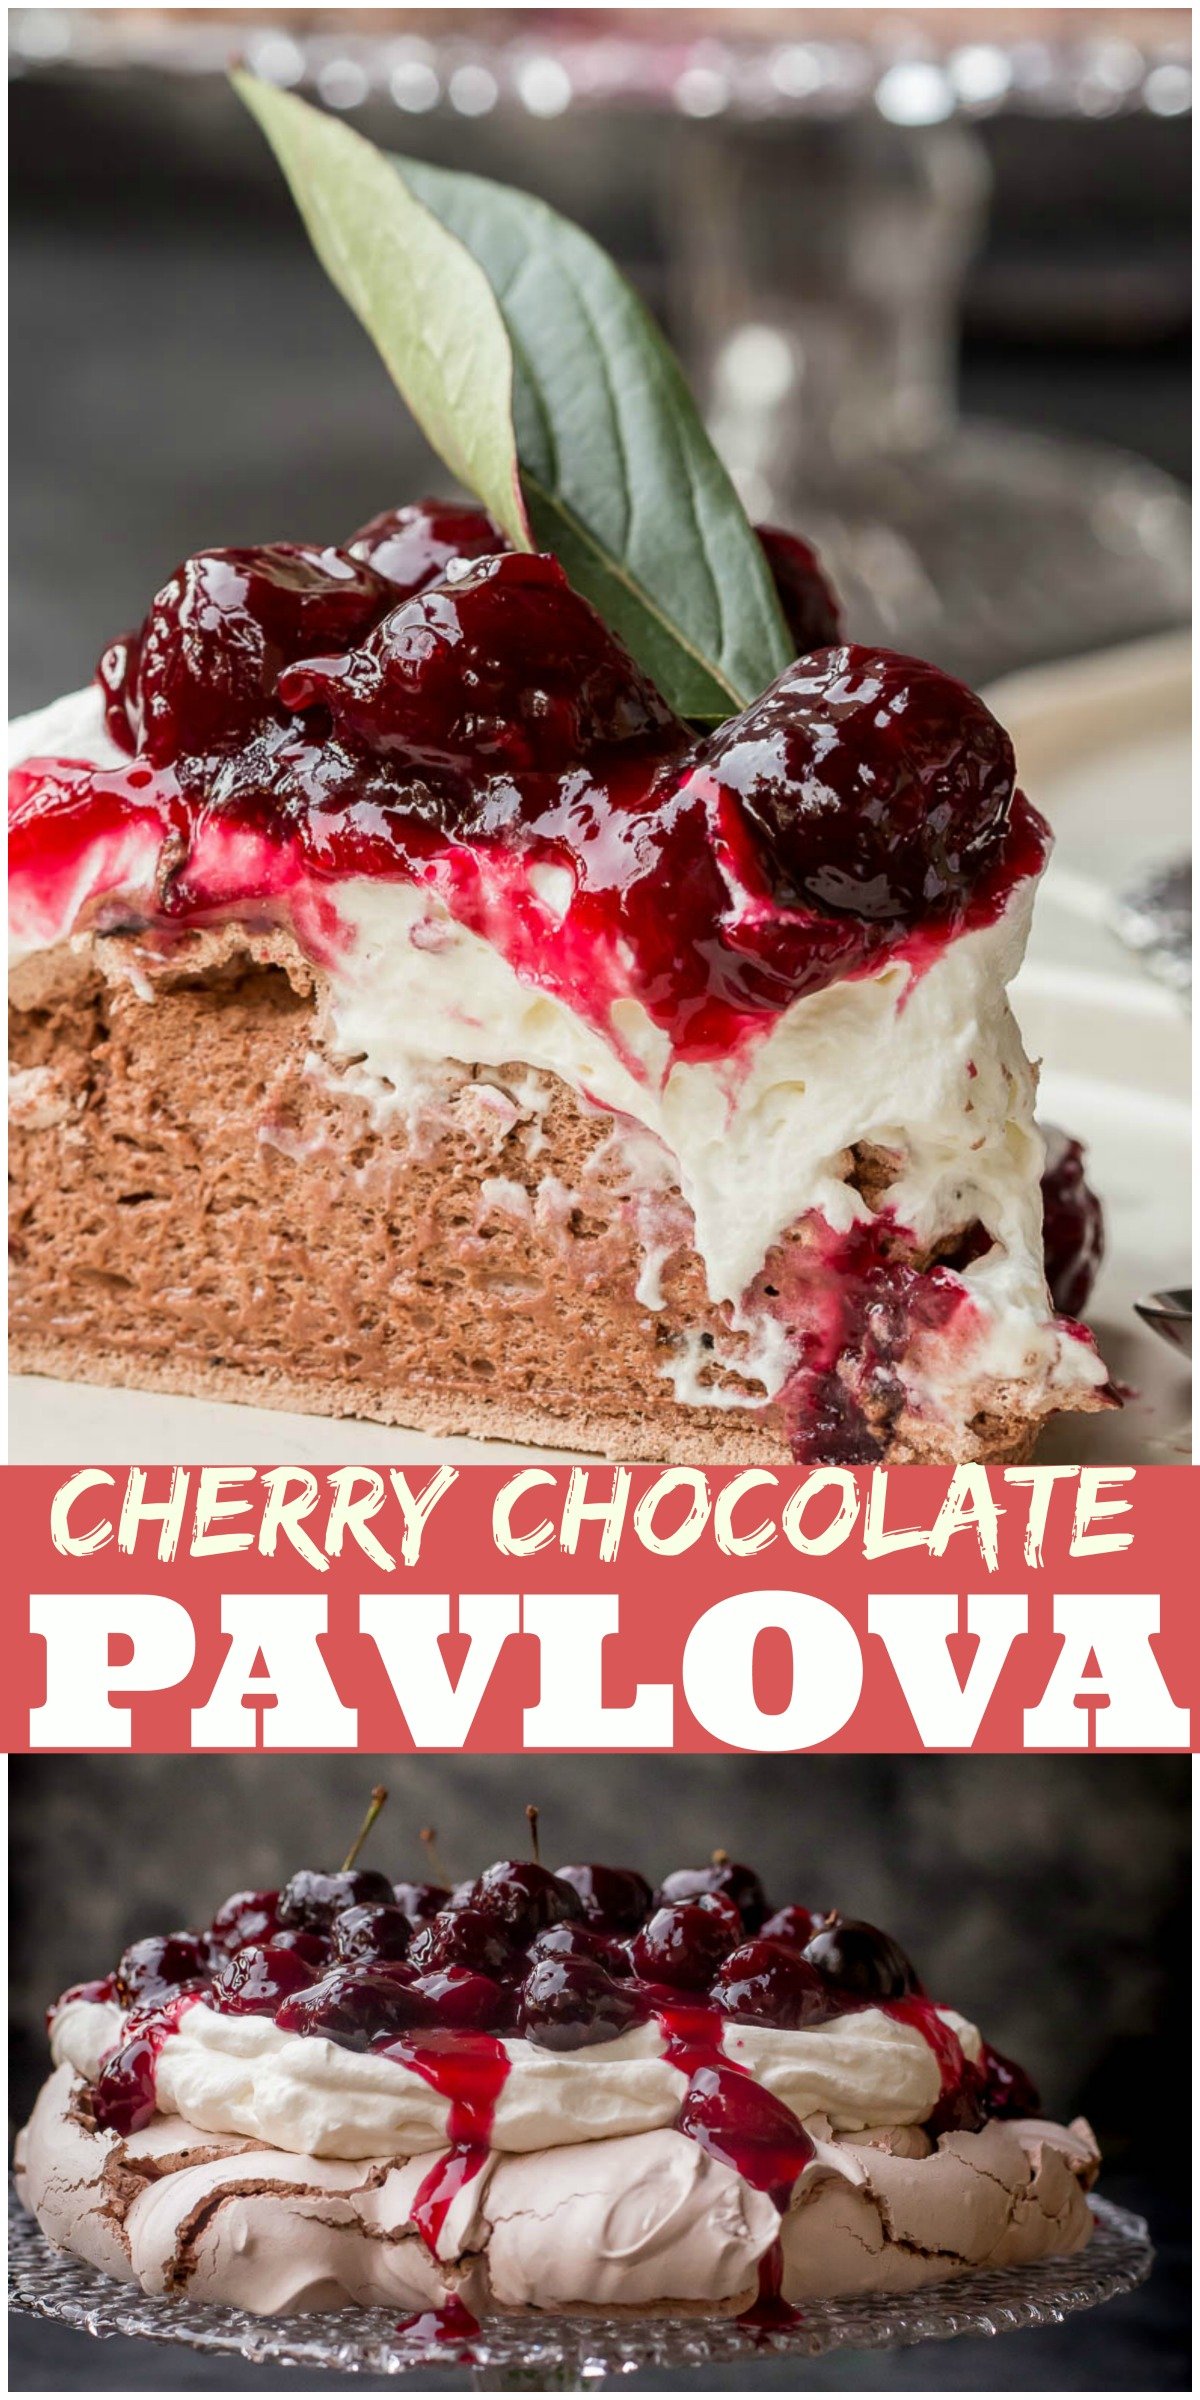 Chocolate Cherry Pavlova is a meringue dessert that's made of crispy on the outside and soft and fluffy as a cloud inside meringue disk, which is then topped with whipped cream and cherry sauce.